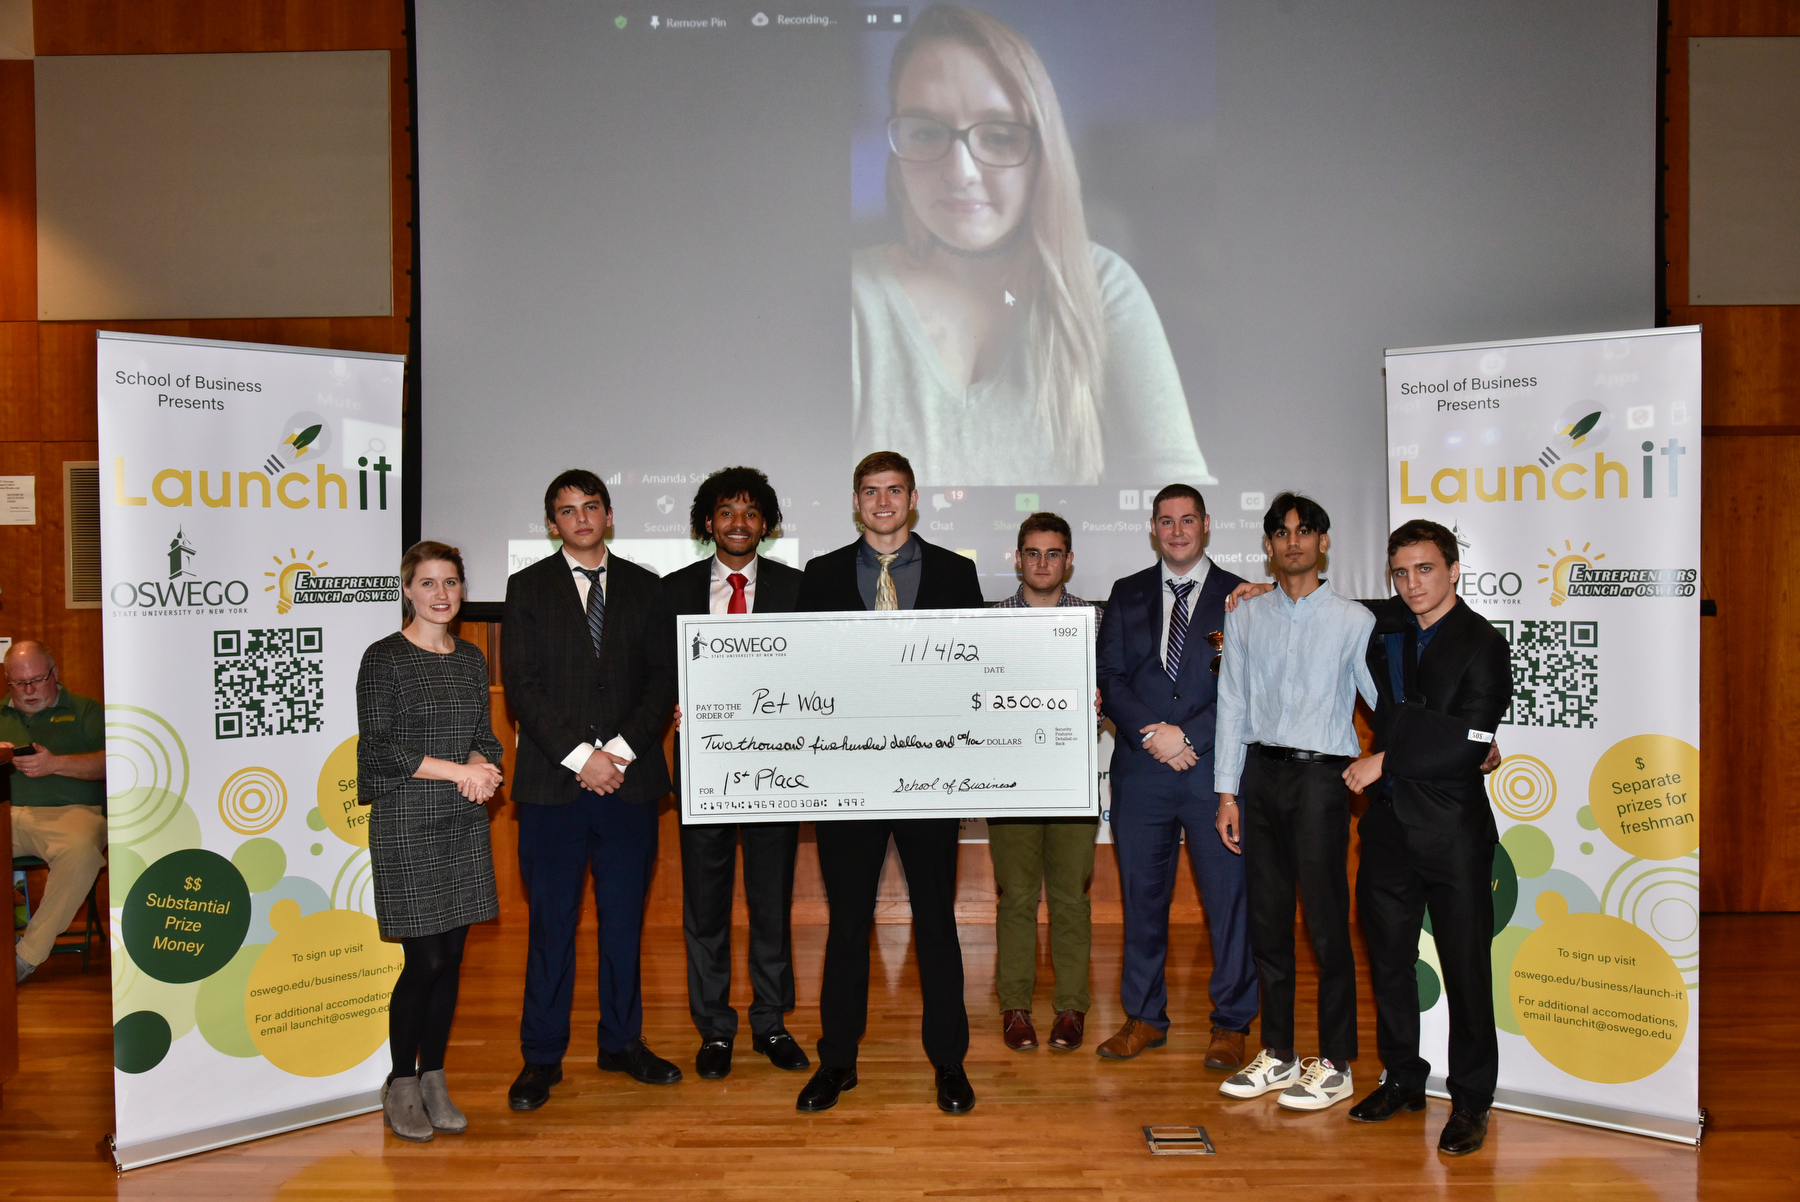 SUNY Oswego’s Launch It student entrepreneur competition, hosted by the School of Business, provides students with a platform featuring resources, mentorship and financial rewards to develop and launch innovative ideas in business and social sectors. 